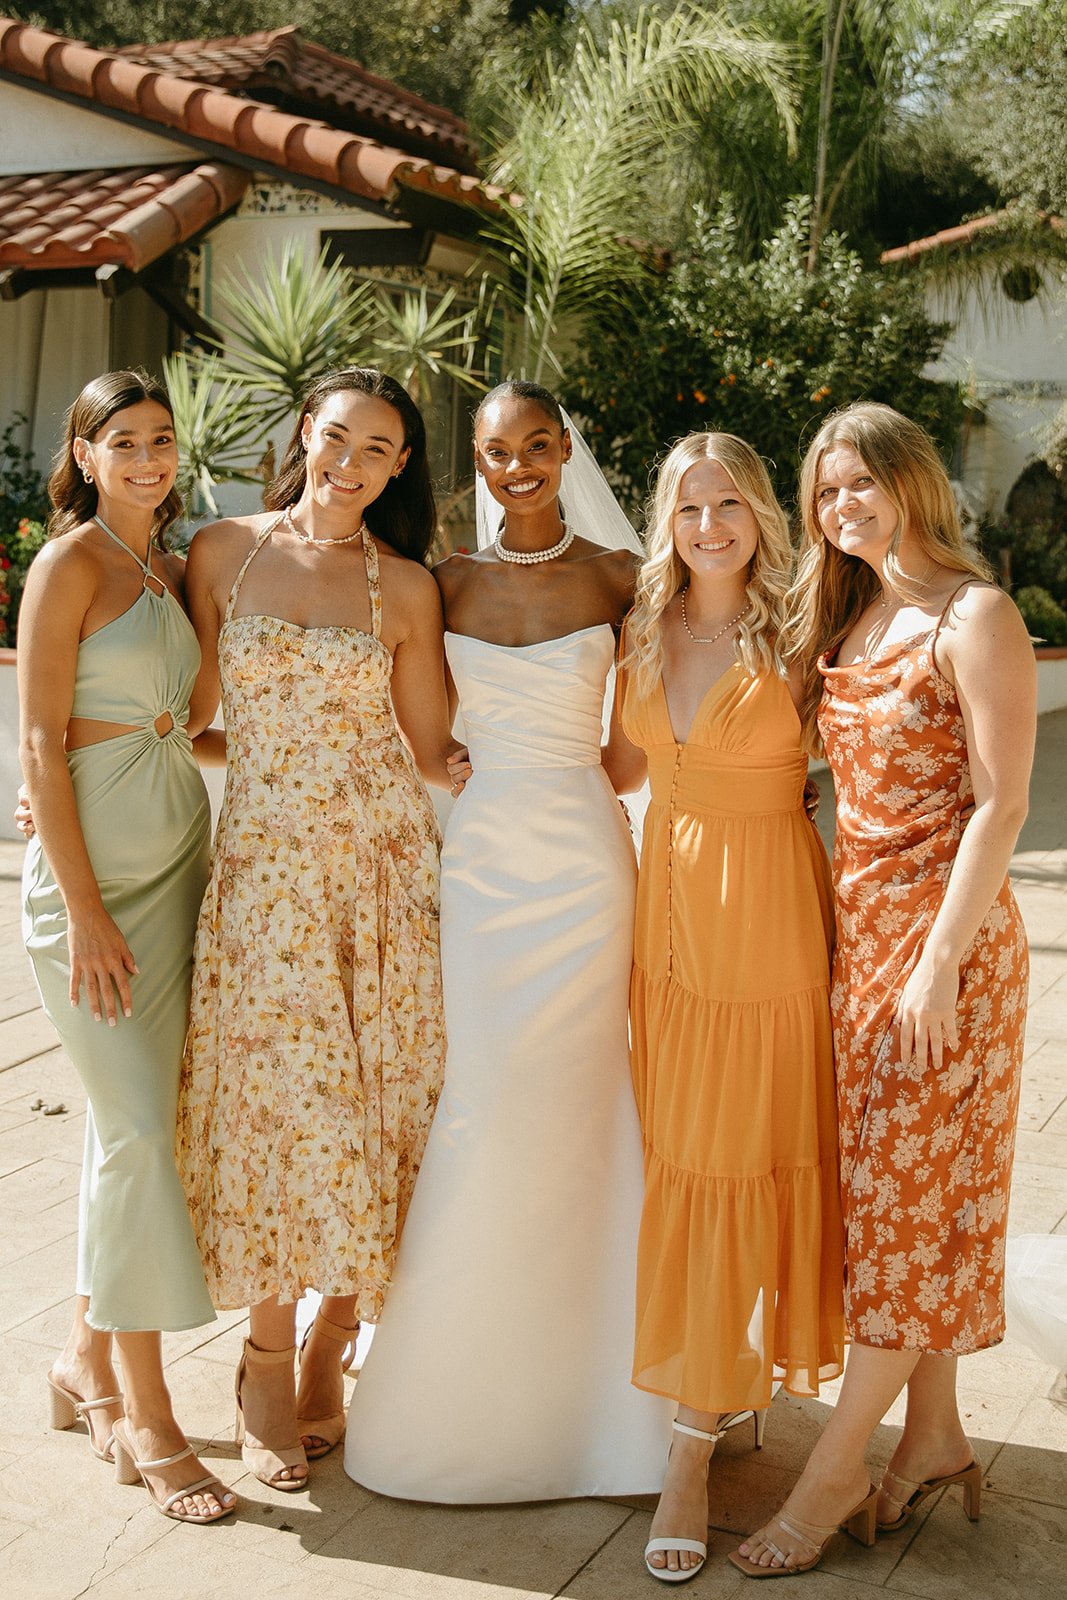 Bride and bridesmaid smiling and posing in colorful dresses